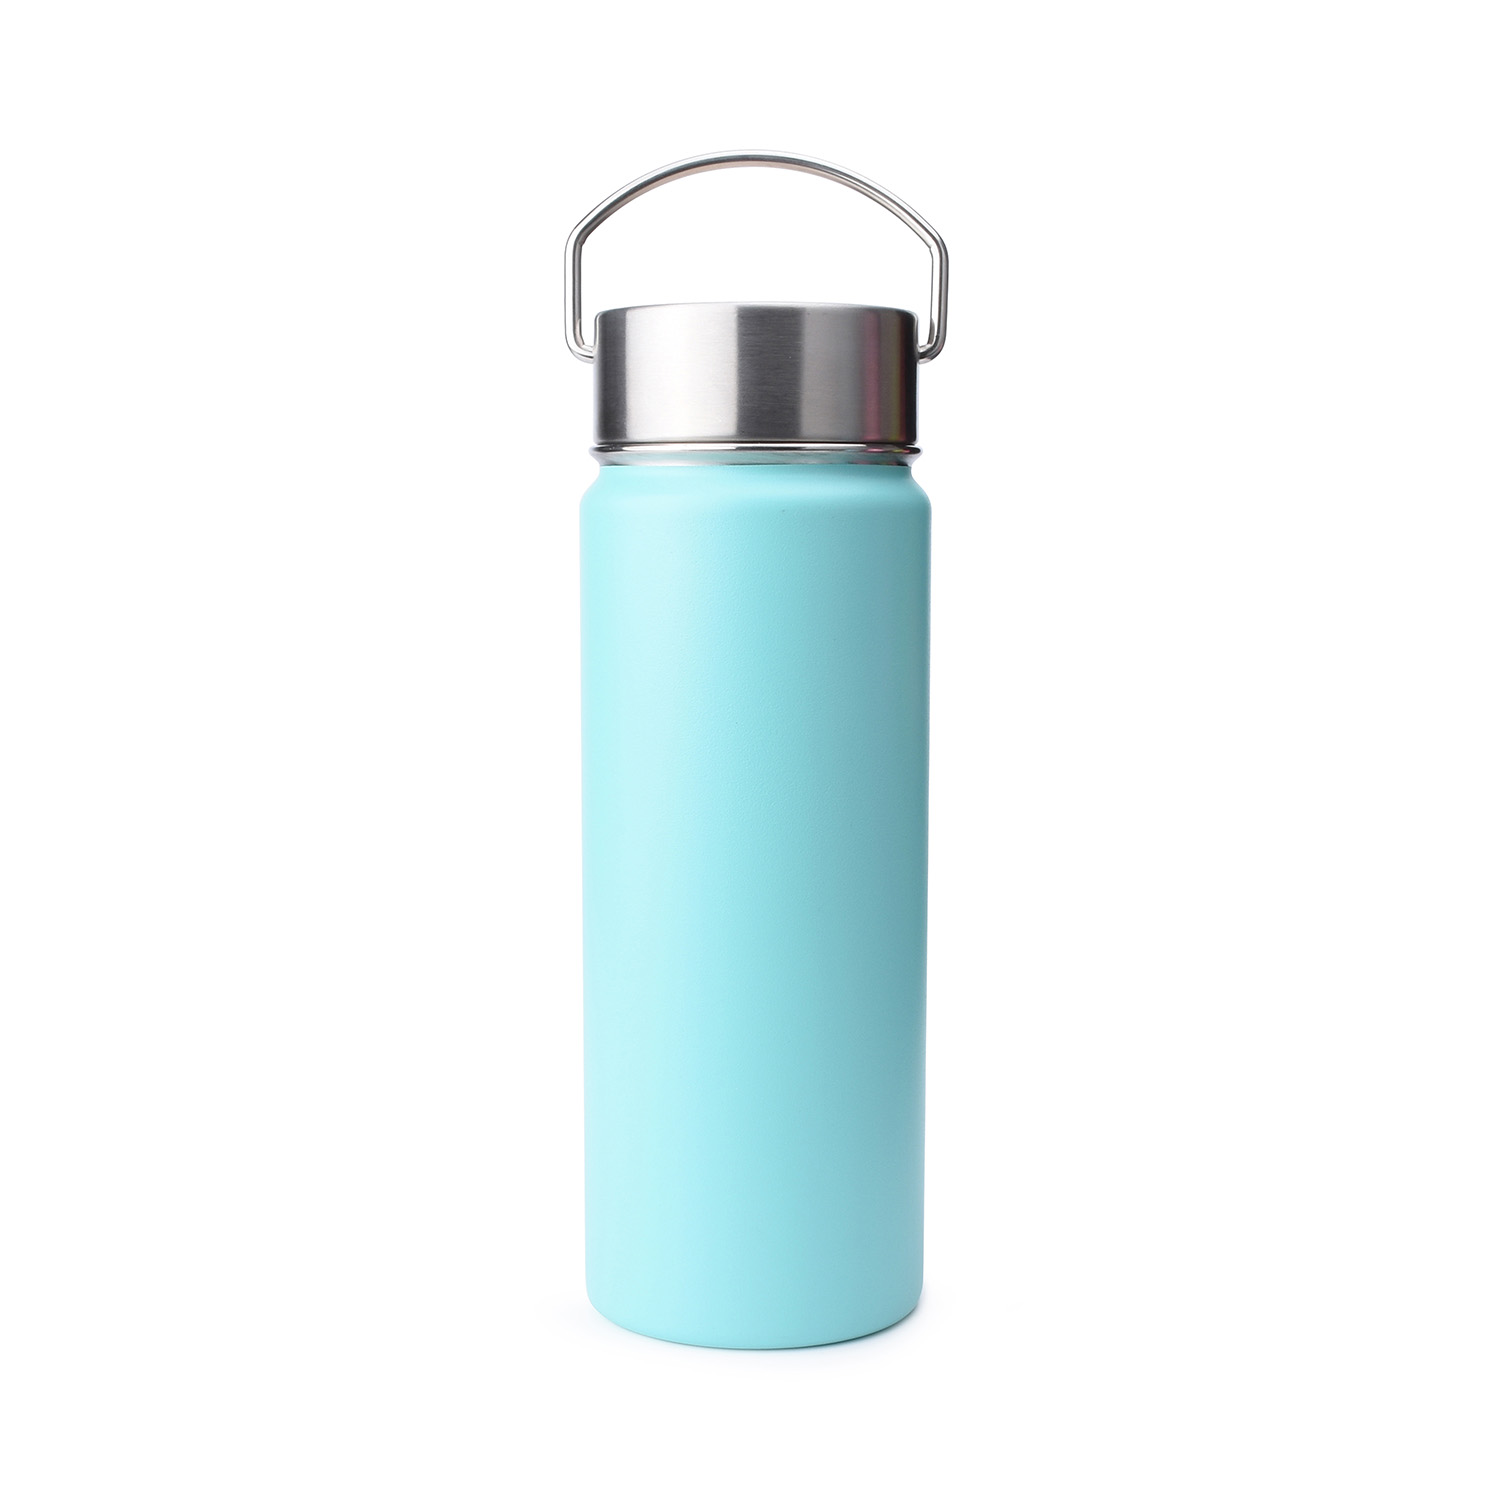 https://www.waterbottle.tech/wp-content/uploads/2018/10/wide-mouth-water-bottle-with-stainless-steel-handle-s111898-1.jpg